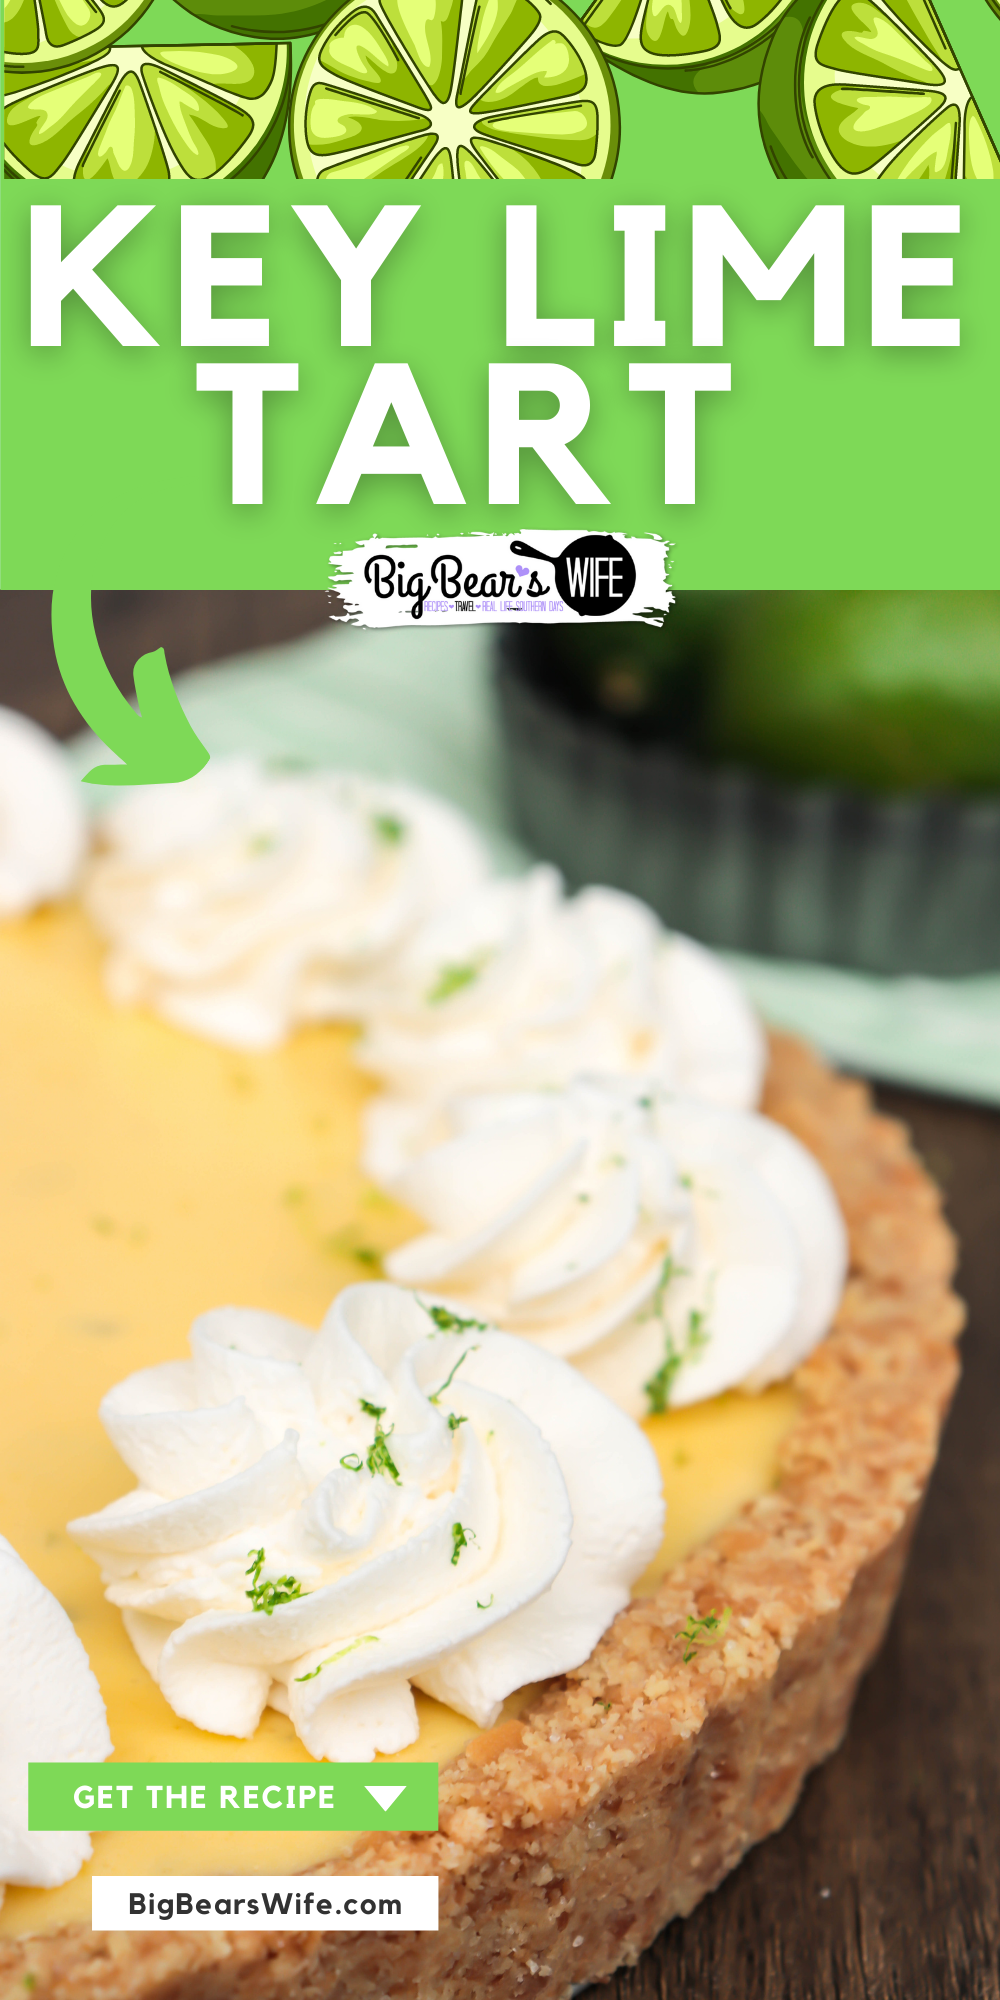 This easy Key Lime Tart has a sweet vanilla wafer crust, a tart key lime filling and it's topped with swirls of whipped cream and sprinkled with lime zest! This dessert is light and perfect for spring! via @bigbearswife